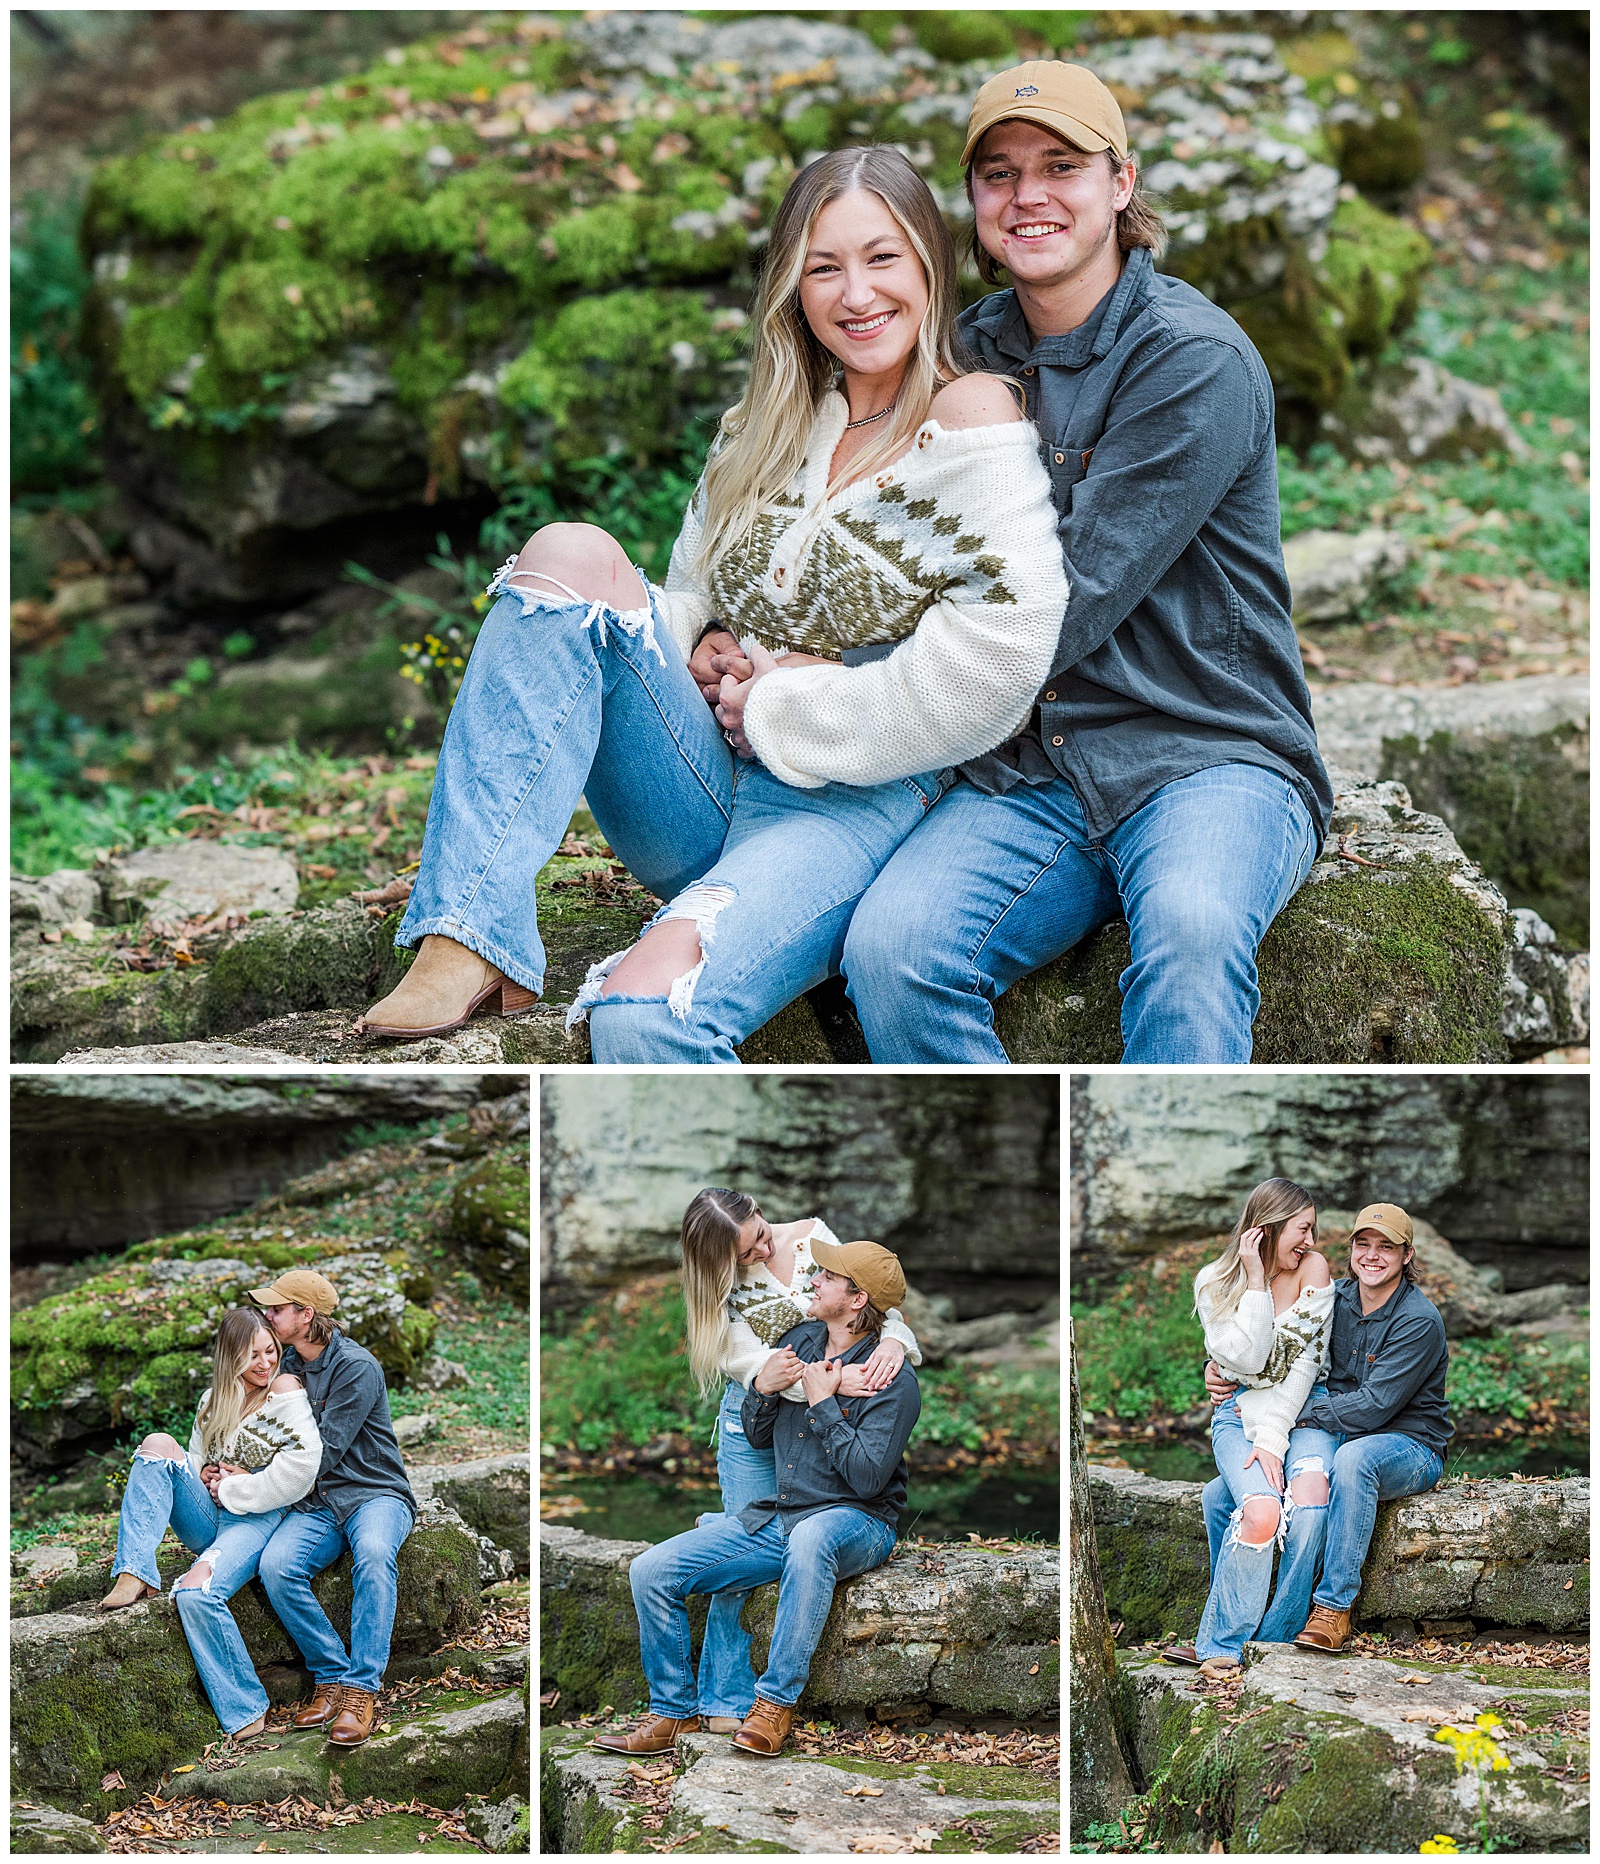 Fall engagement session photos at Compton Caves